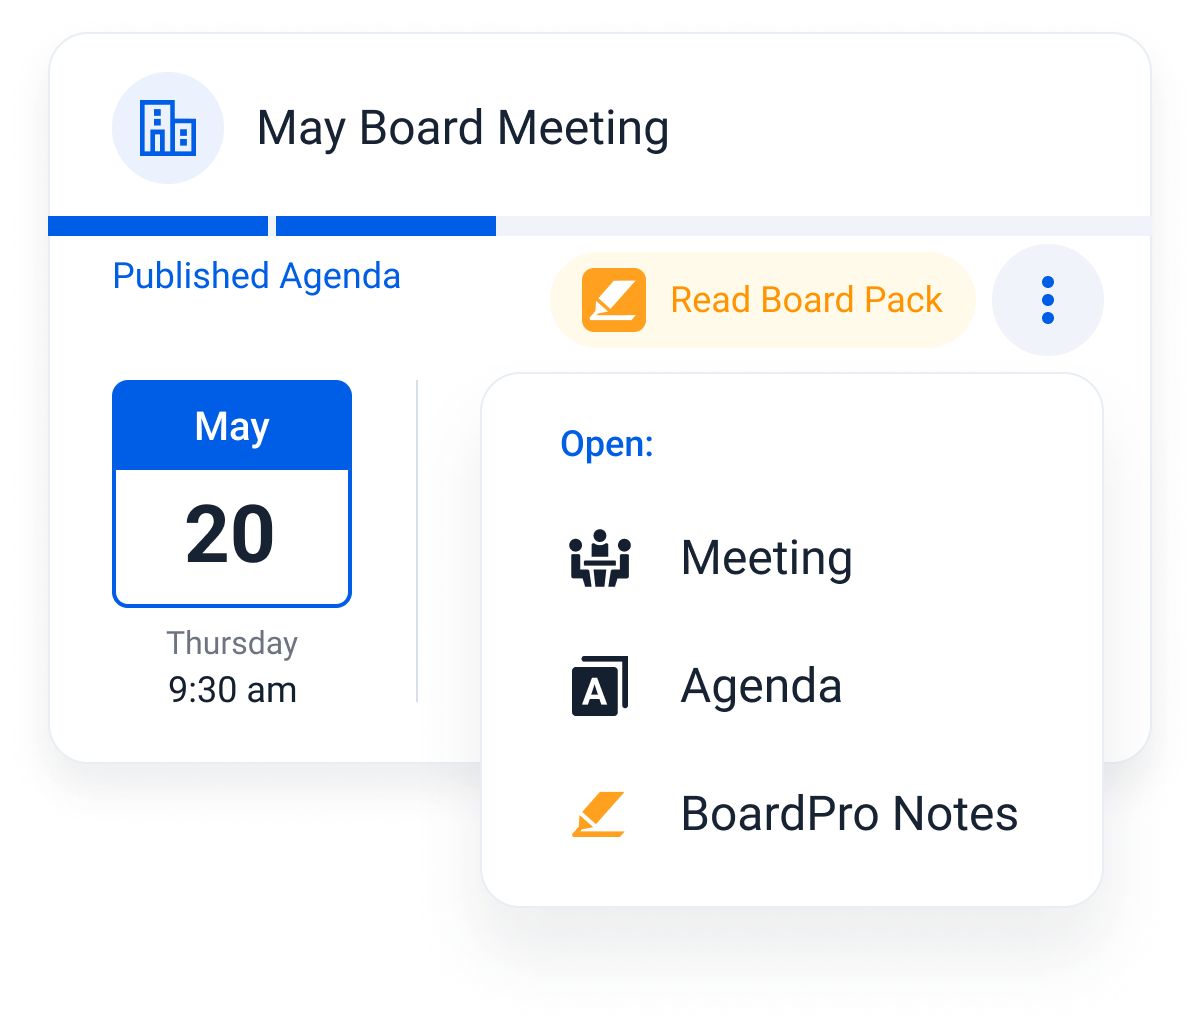 A meeting card showing a menu of options to open the meeting, agenda, or BoardPro notes